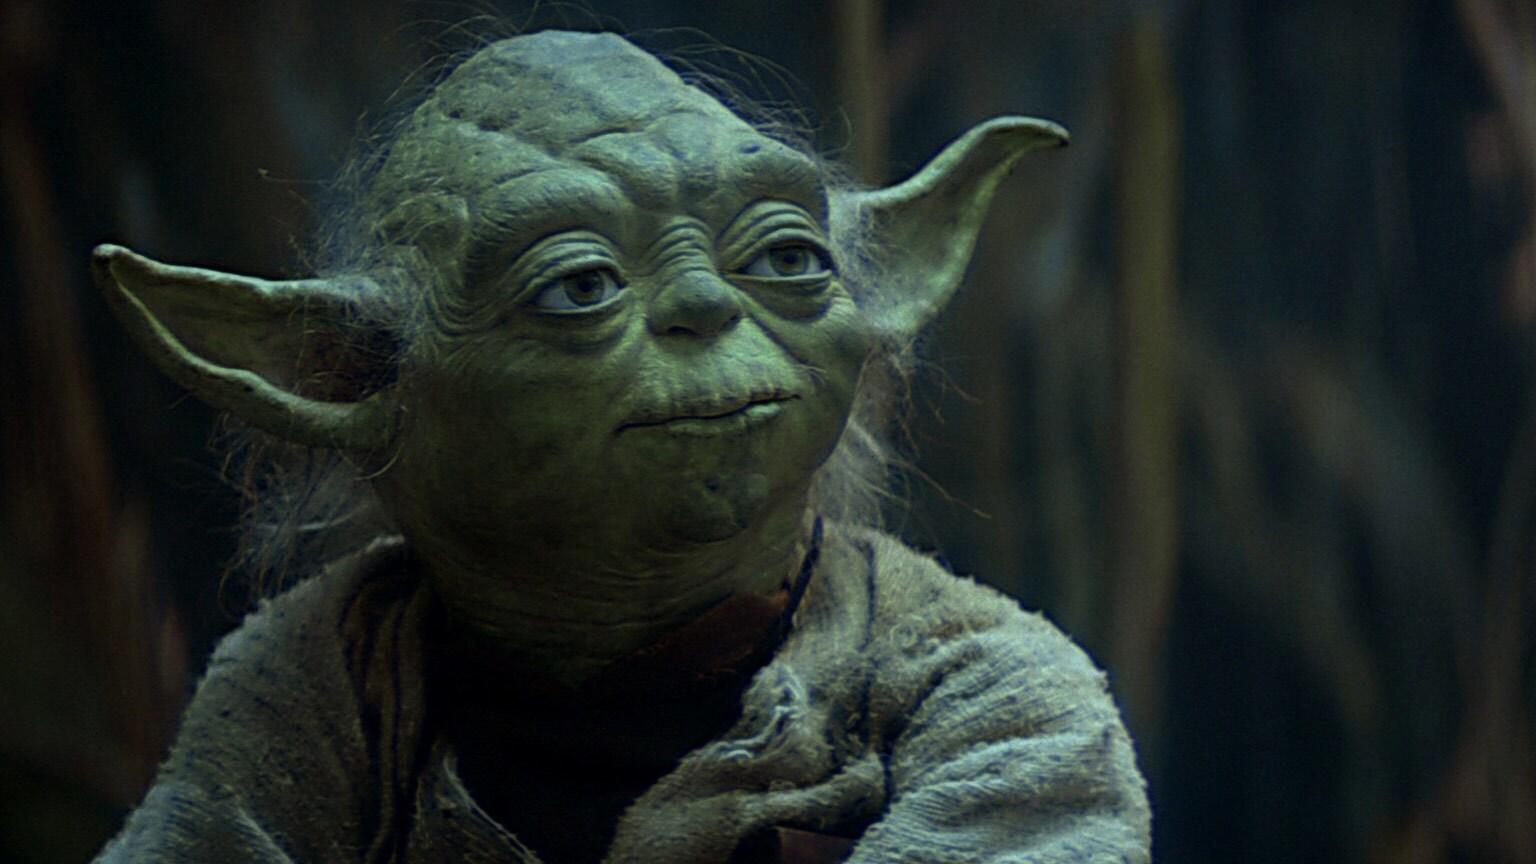 DK Publishing's Be More Yoda Will Put You on the Path to Jedi Enlightenment - Exclusive Reveal